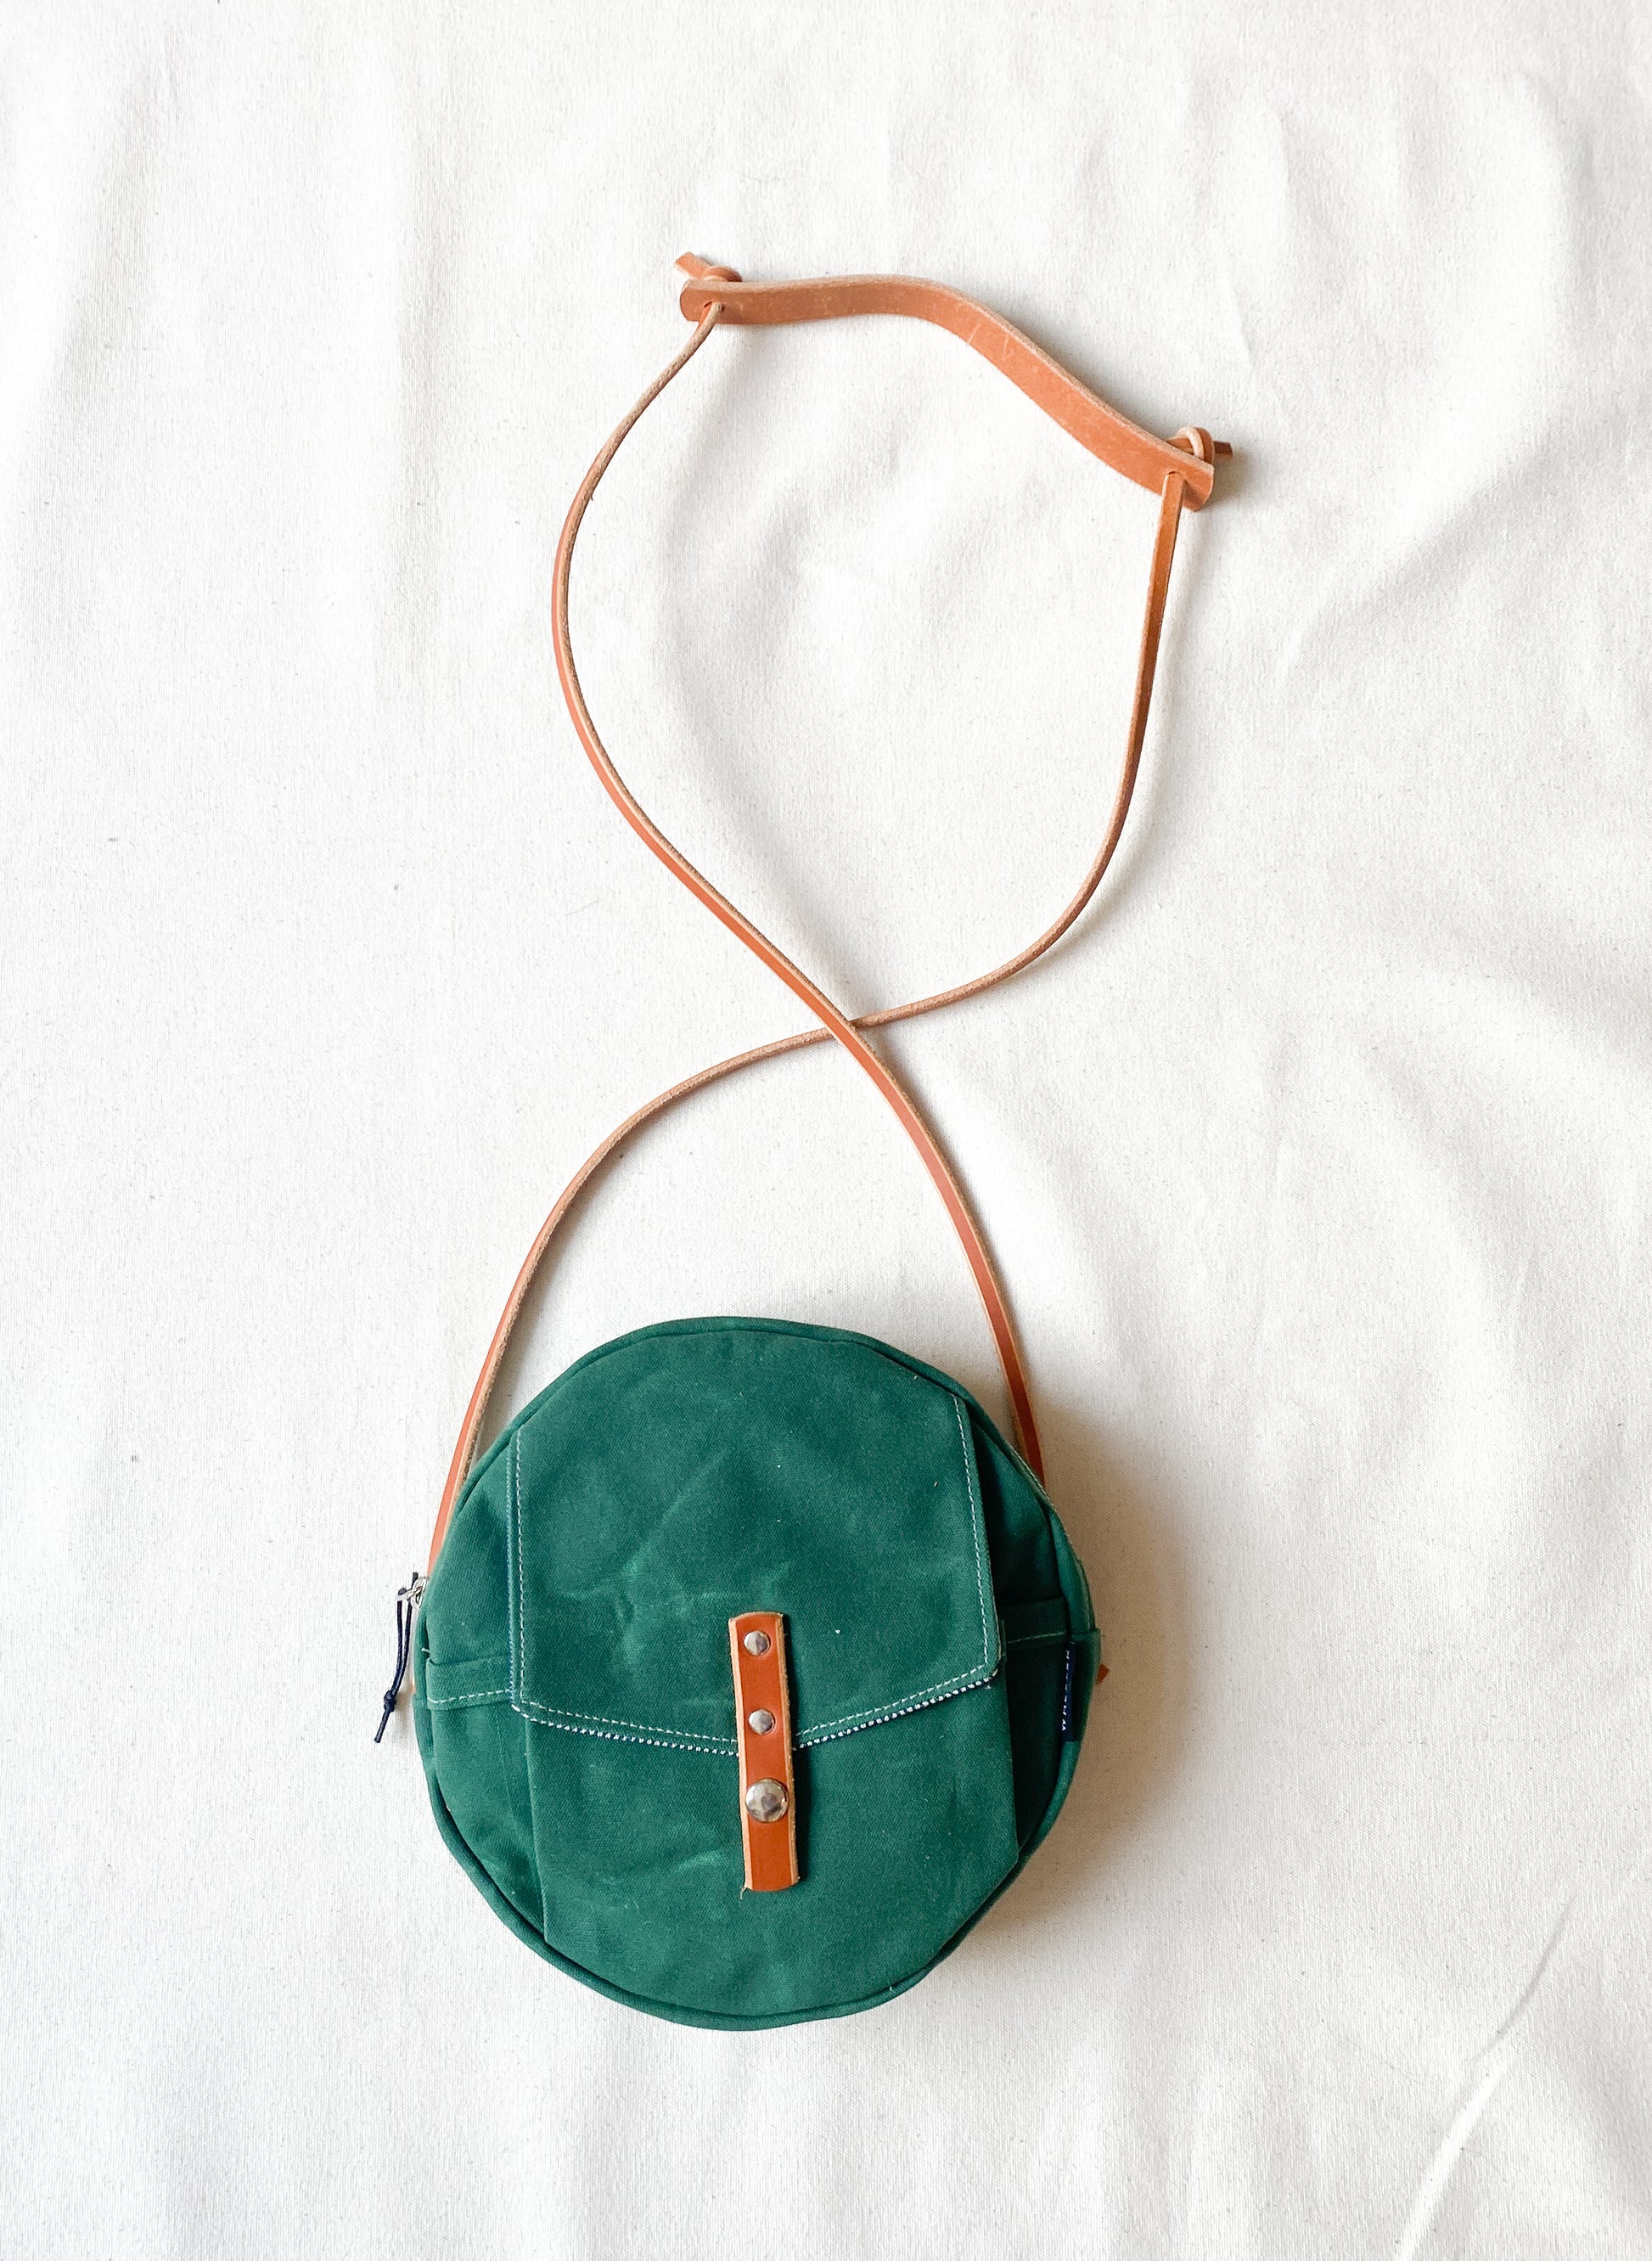 Circle bag with leather straps in Hunter.